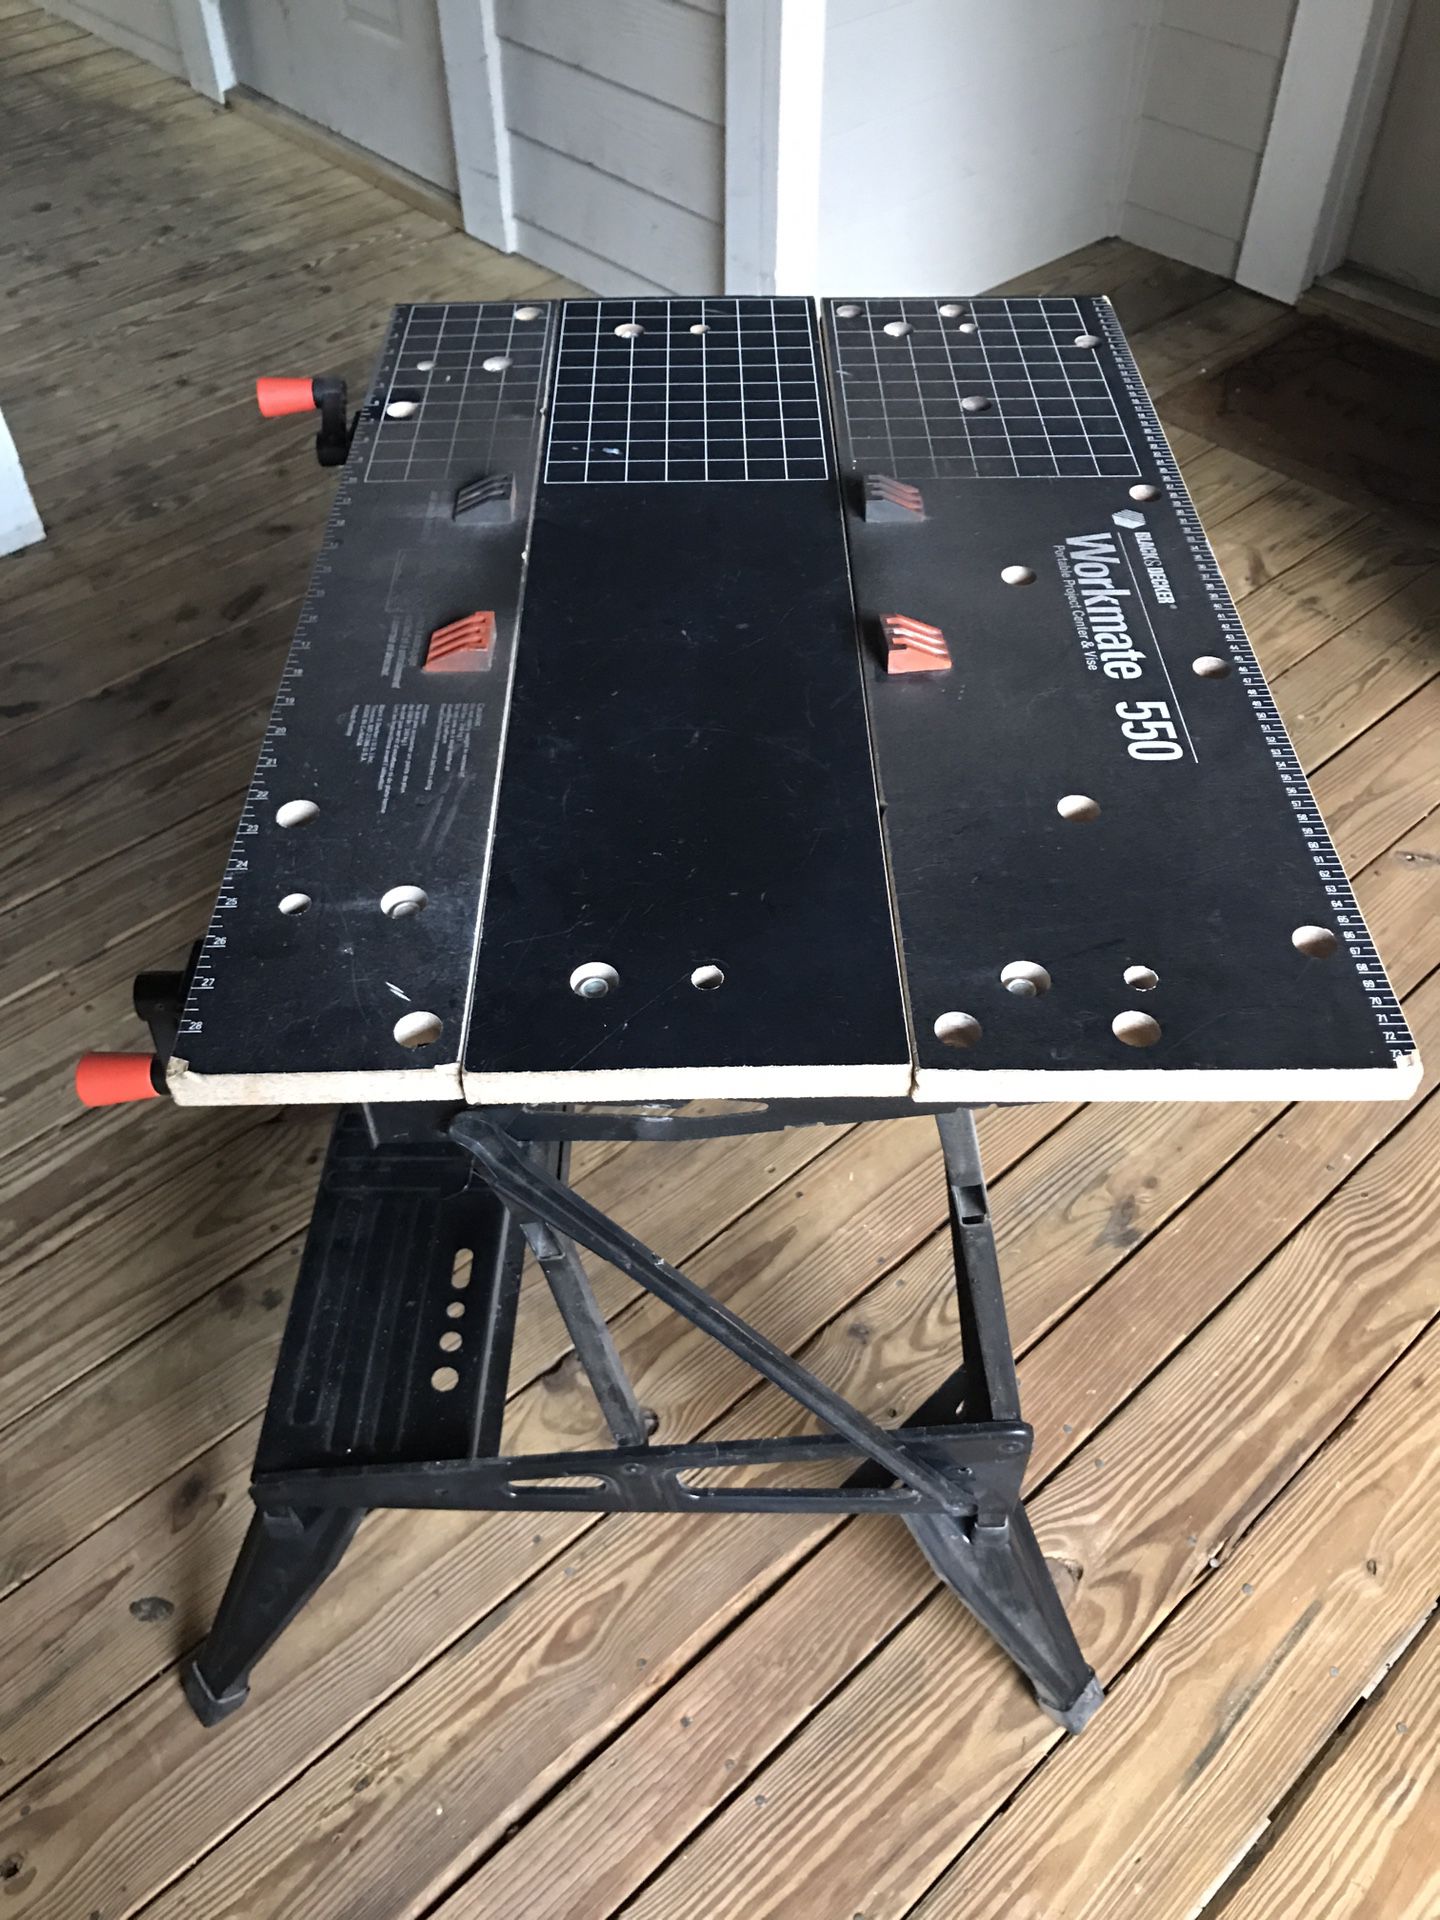 Black and decker workmate 550 for Sale in Charlotte, NC - OfferUp